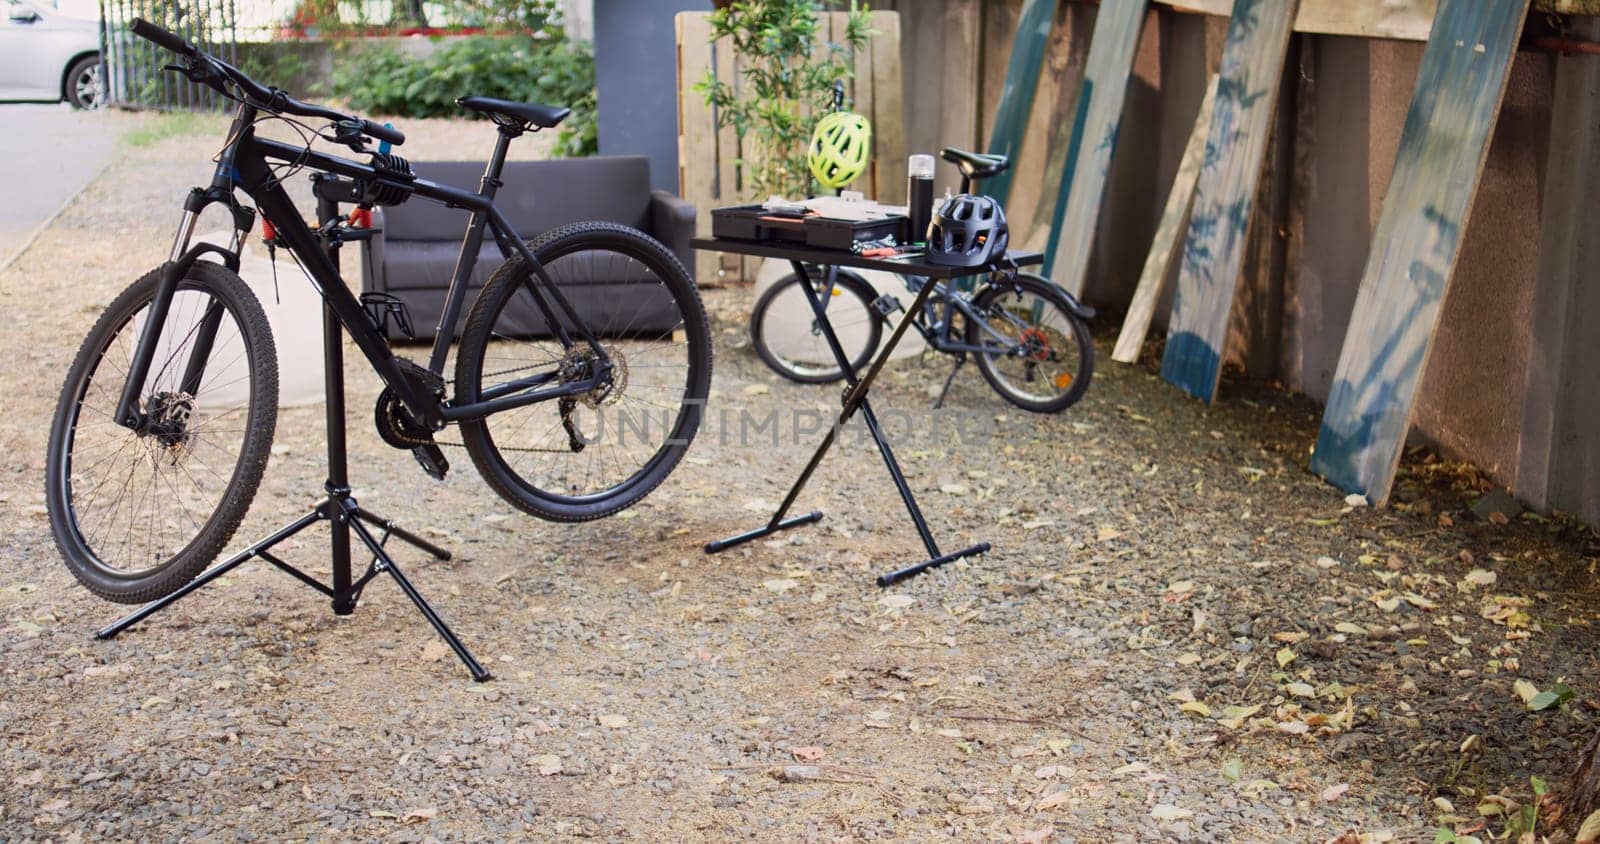 View of modern damaged bikes placed and secured in home yard ready for maintenance with professional equipment. Aerial shot of bicycle on repair-stand next to specialized toolbox outdoor.